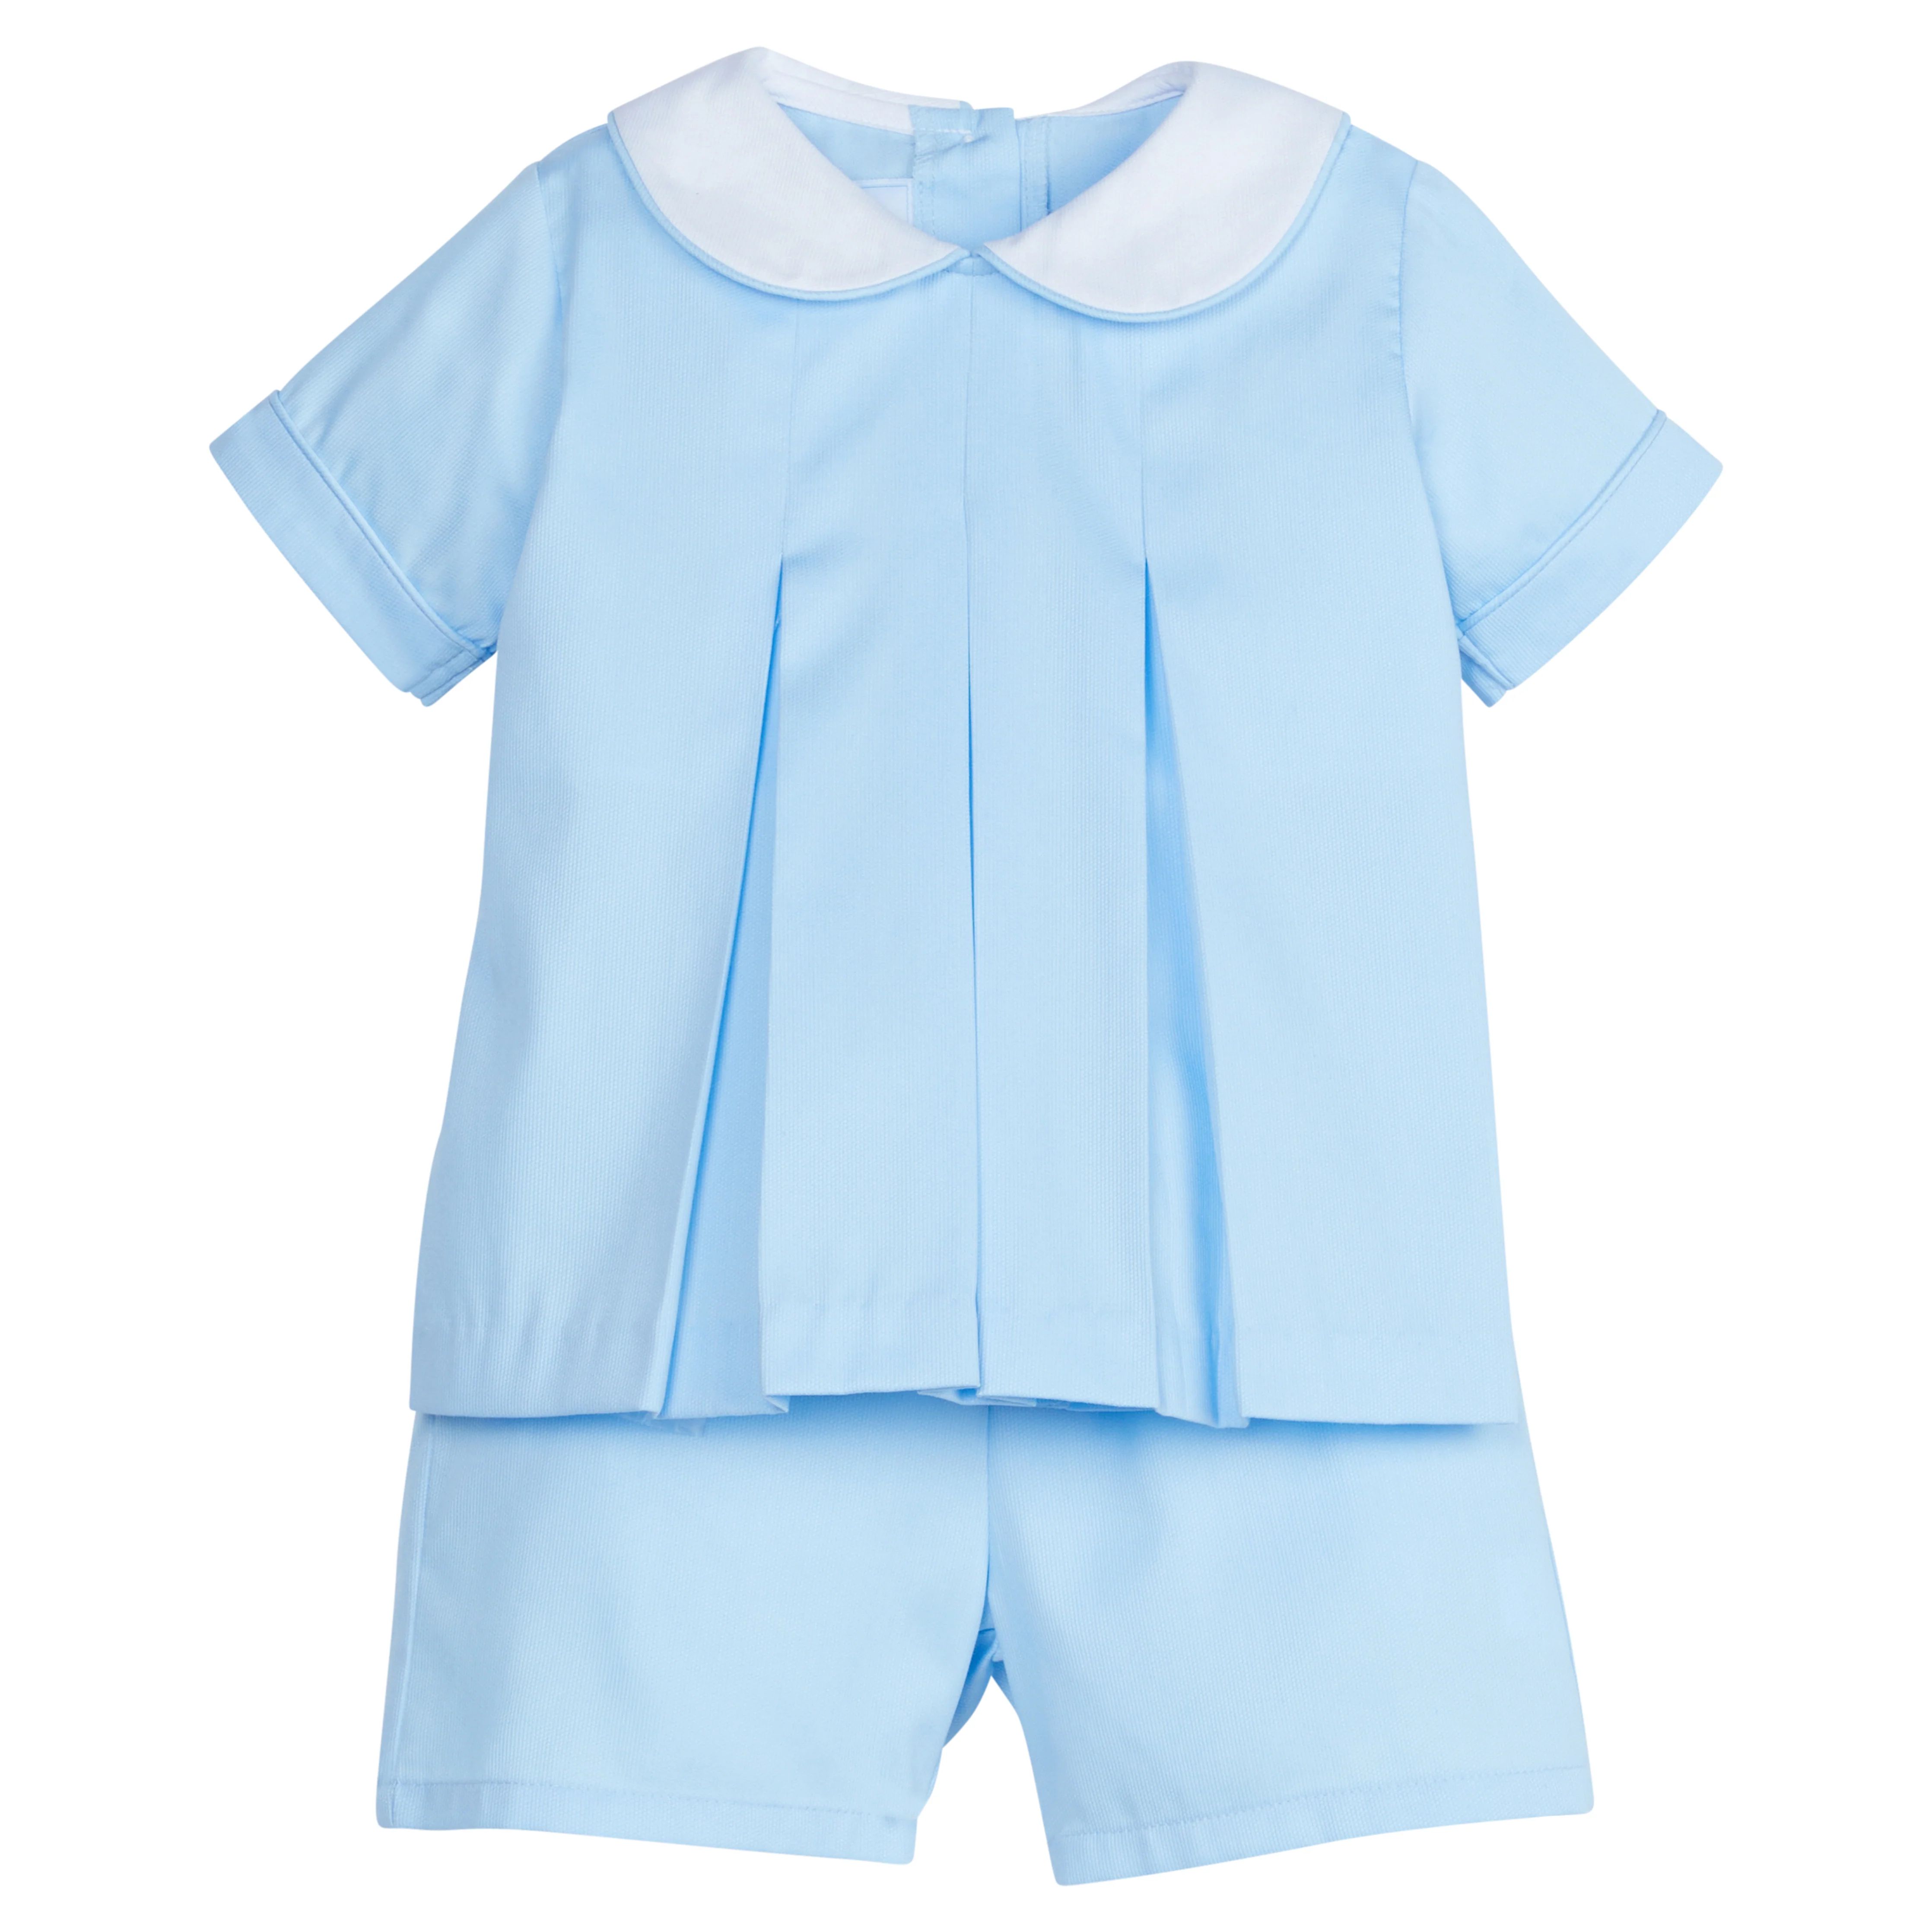 Baby Boy Nicholas Clothes Set - Dressy Outfit | Little English